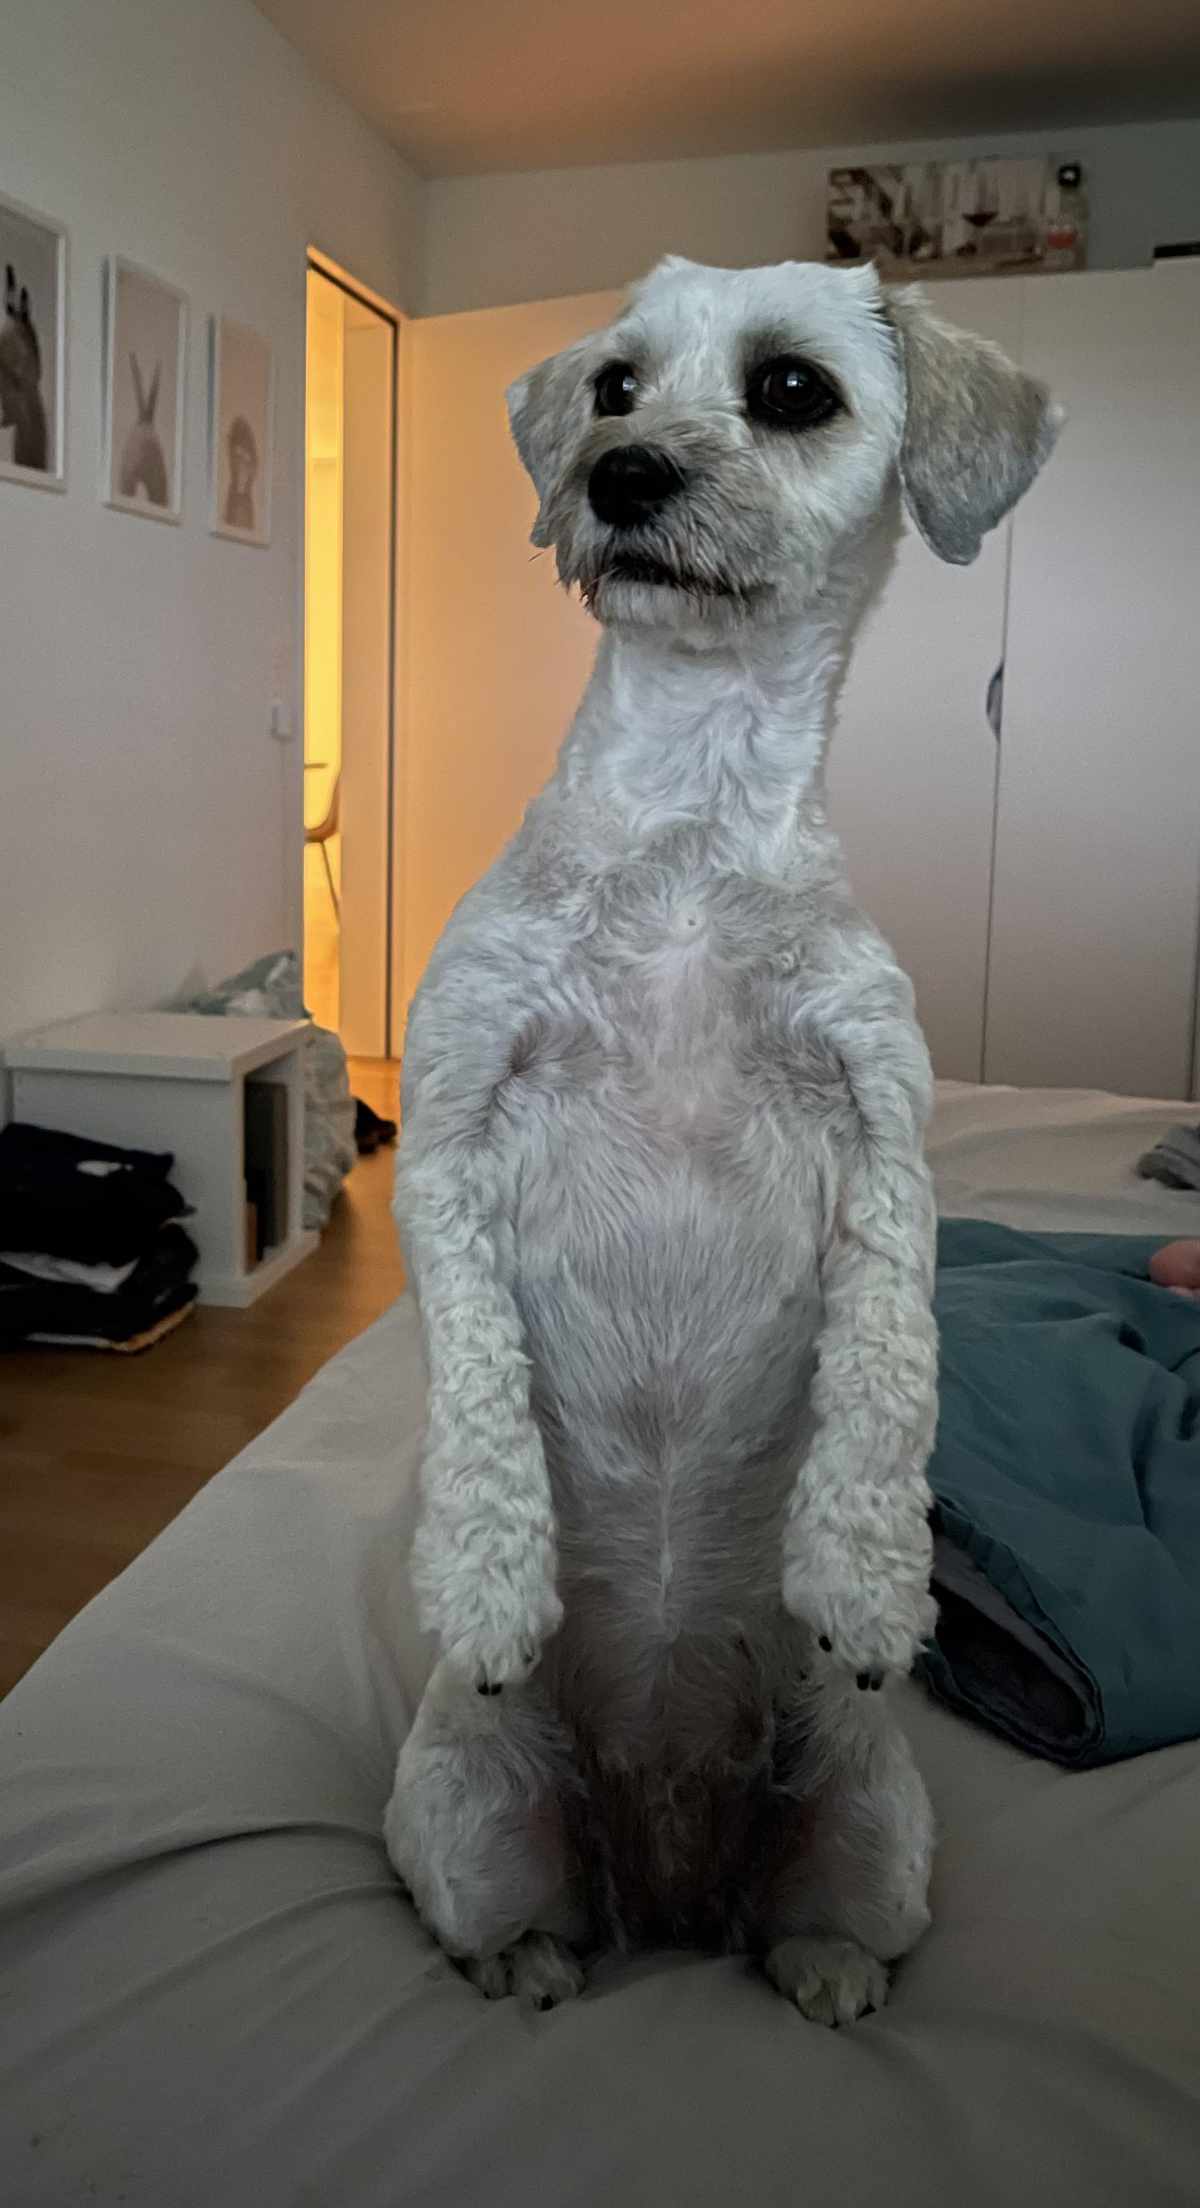 My dog thinks she is a meerkat born in a dogs body